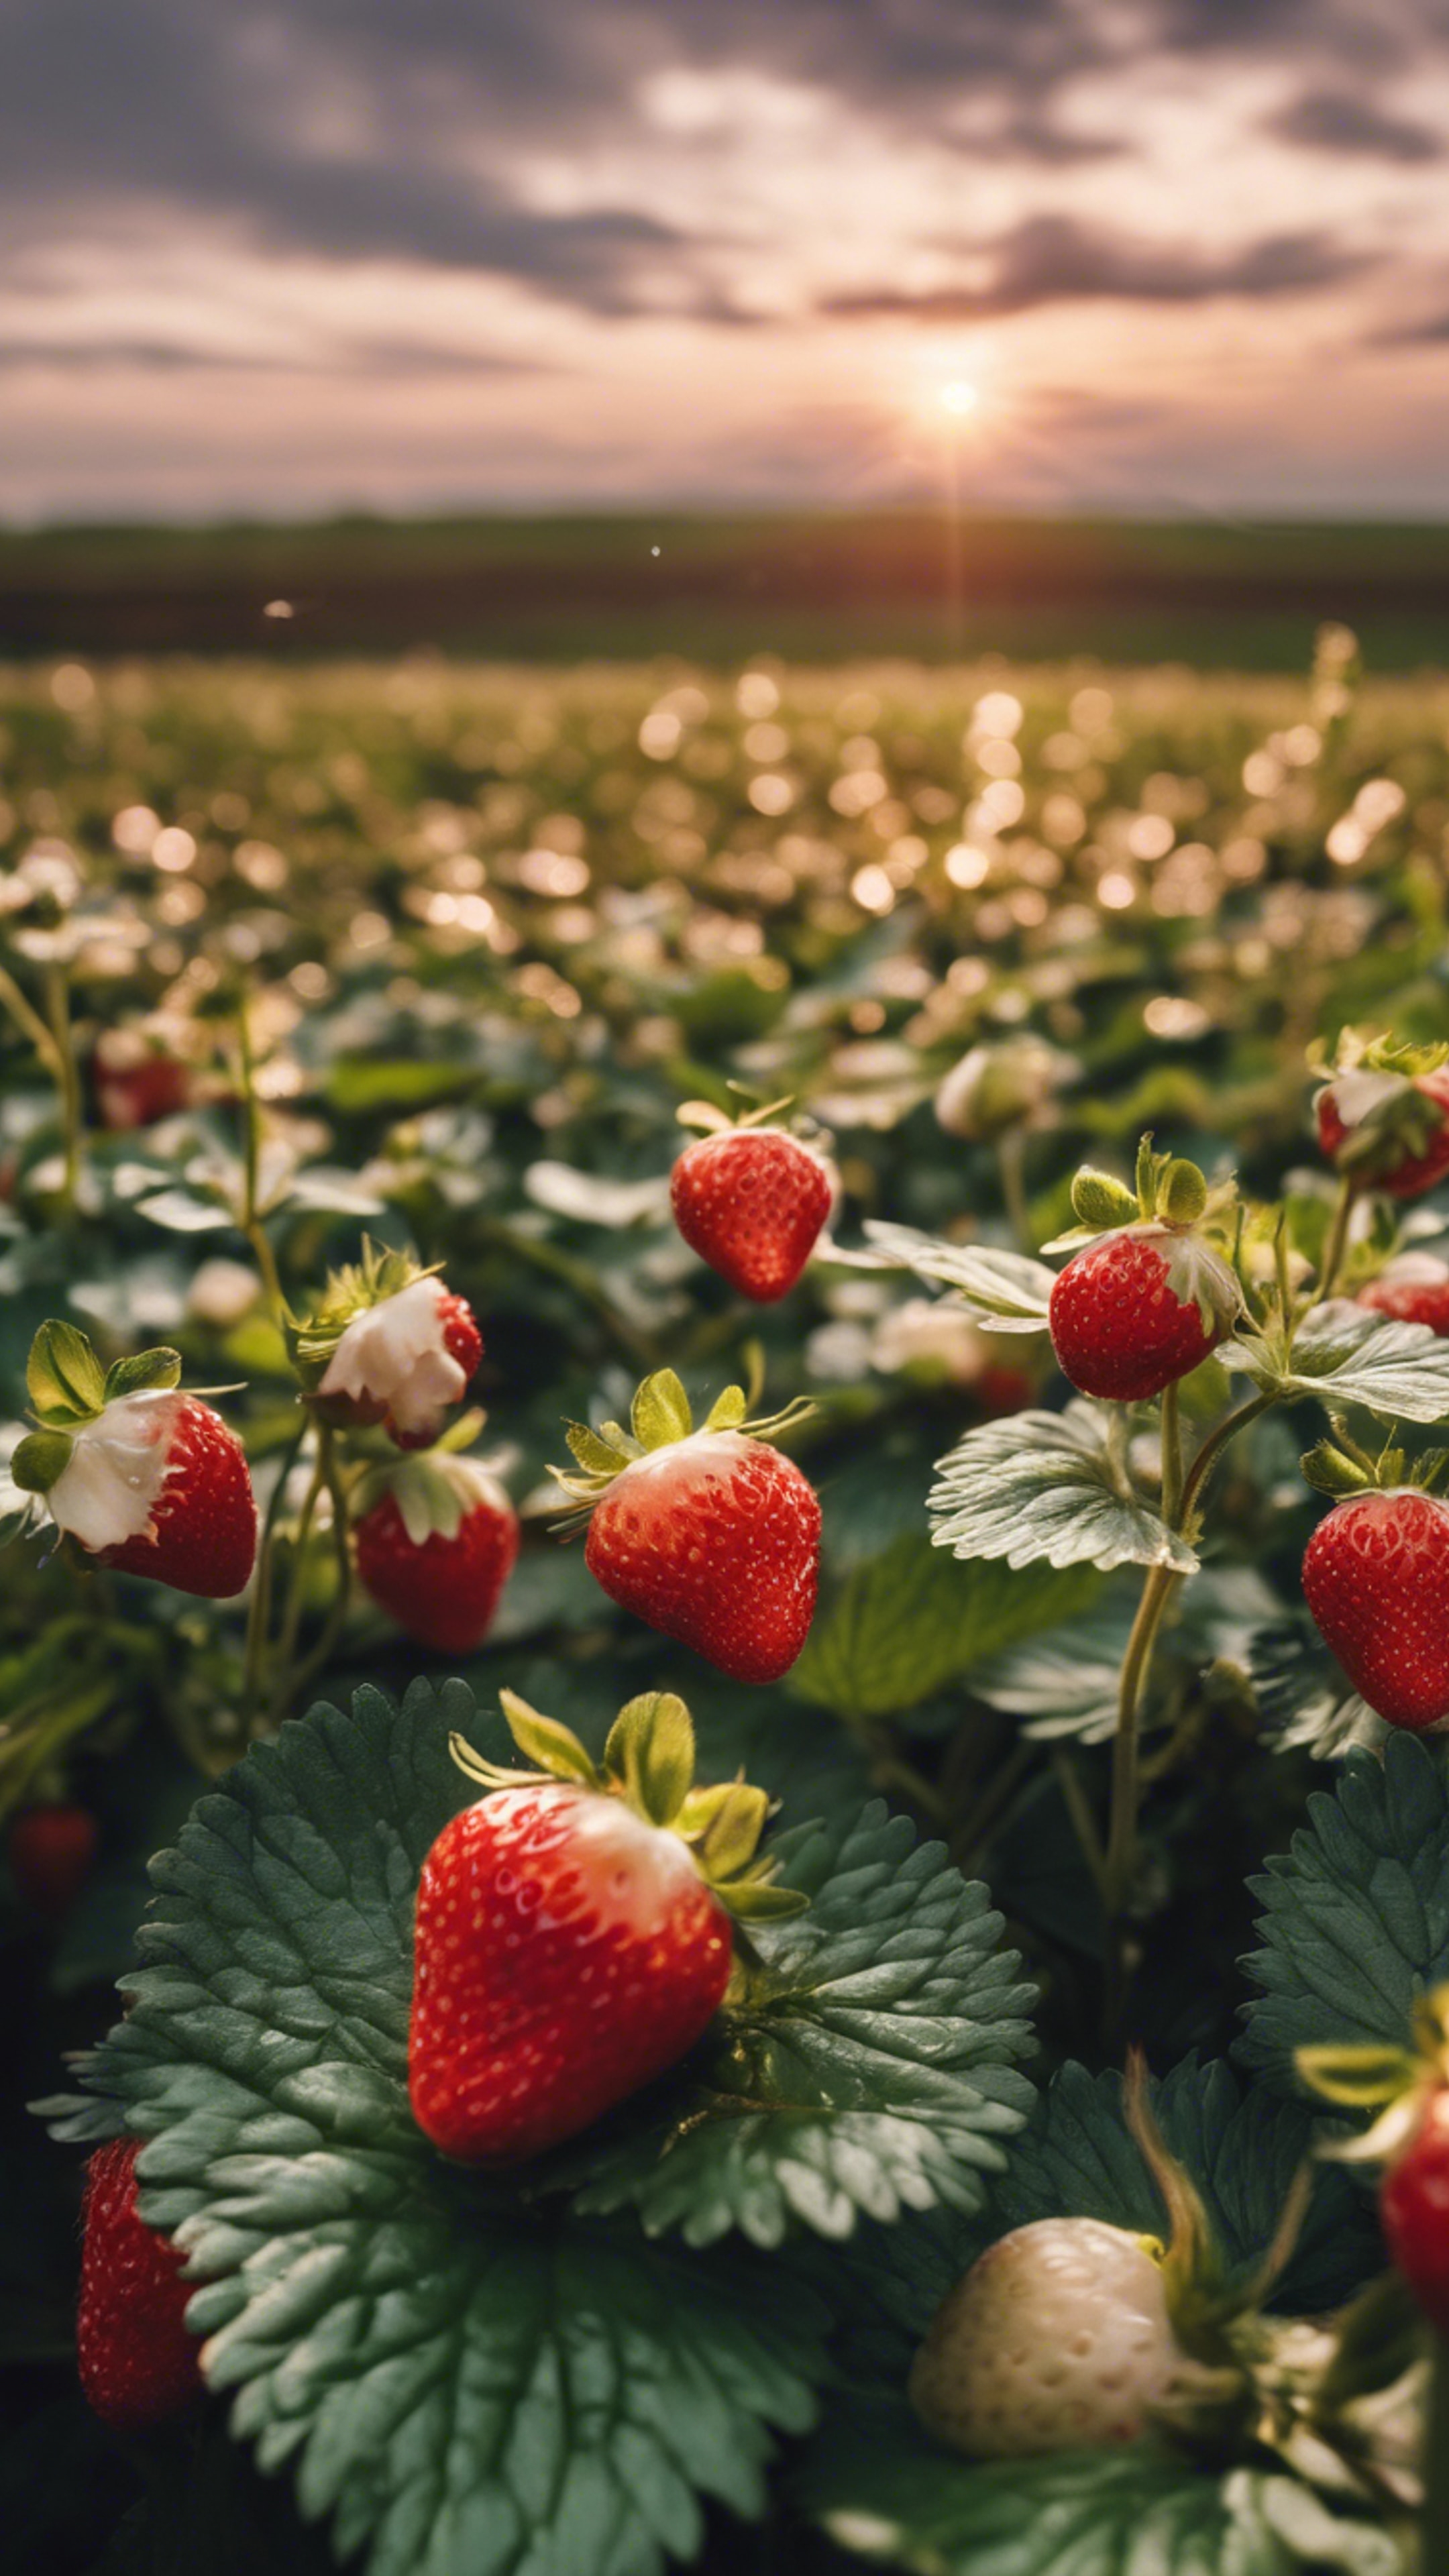 A romantic sunset view over a field of blooming strawberry plants. Tapet[3adde1a5bf4e4528ba85]